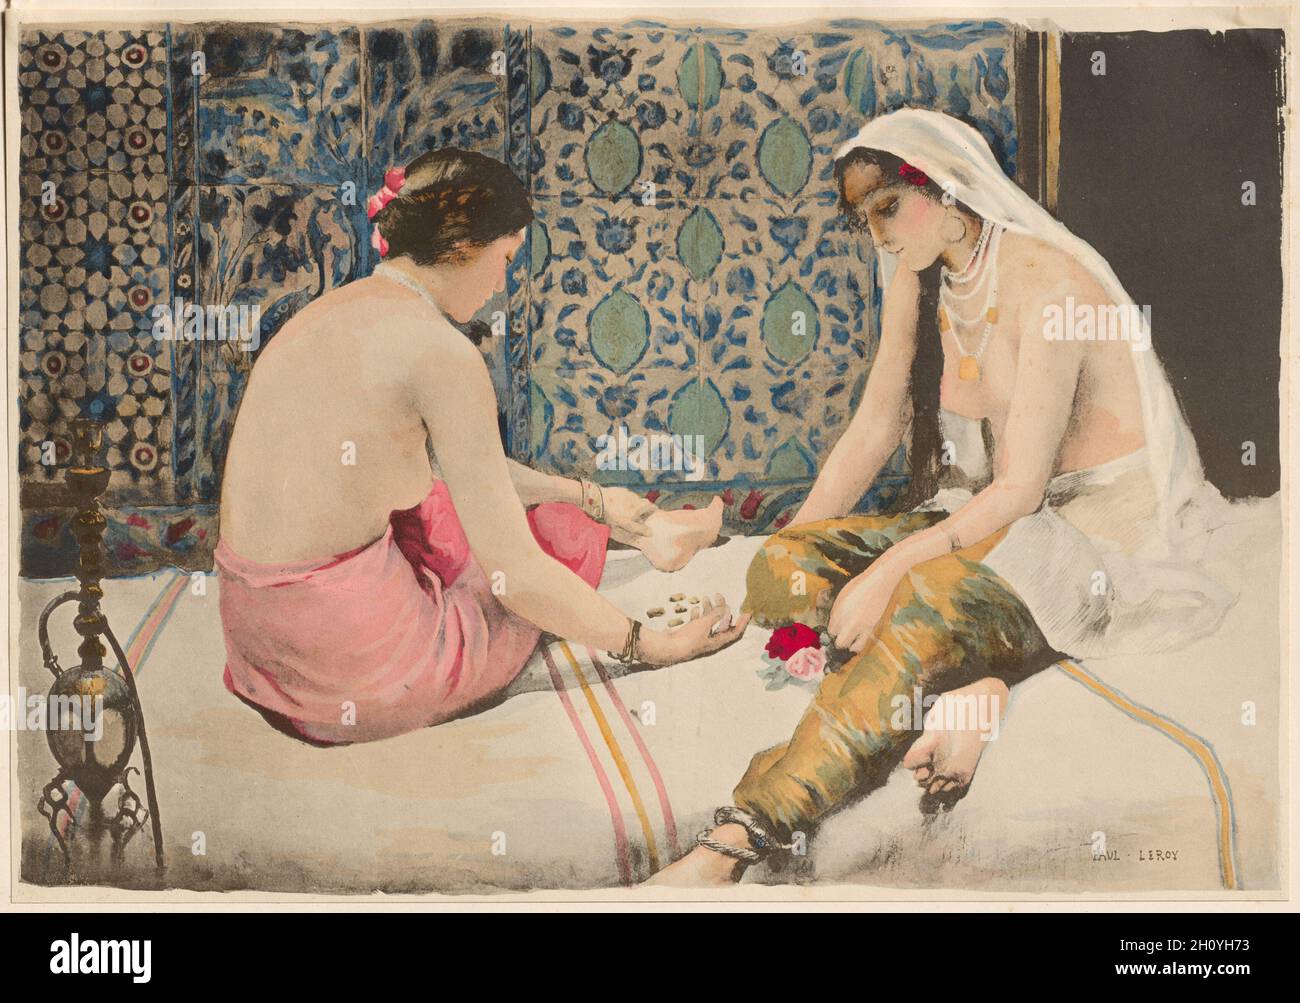 L'Estampe Moderne: Joueuses d'Osselets, 1899. Paul Alexandre Alfred Leroy (French, 1860-1942). Color lithograph; sheet: 40.1 x 30.6 cm (15 13/16 x 12 1/16 in.); image: 24 x 34.5 cm (9 7/16 x 13 9/16 in.). Stock Photo